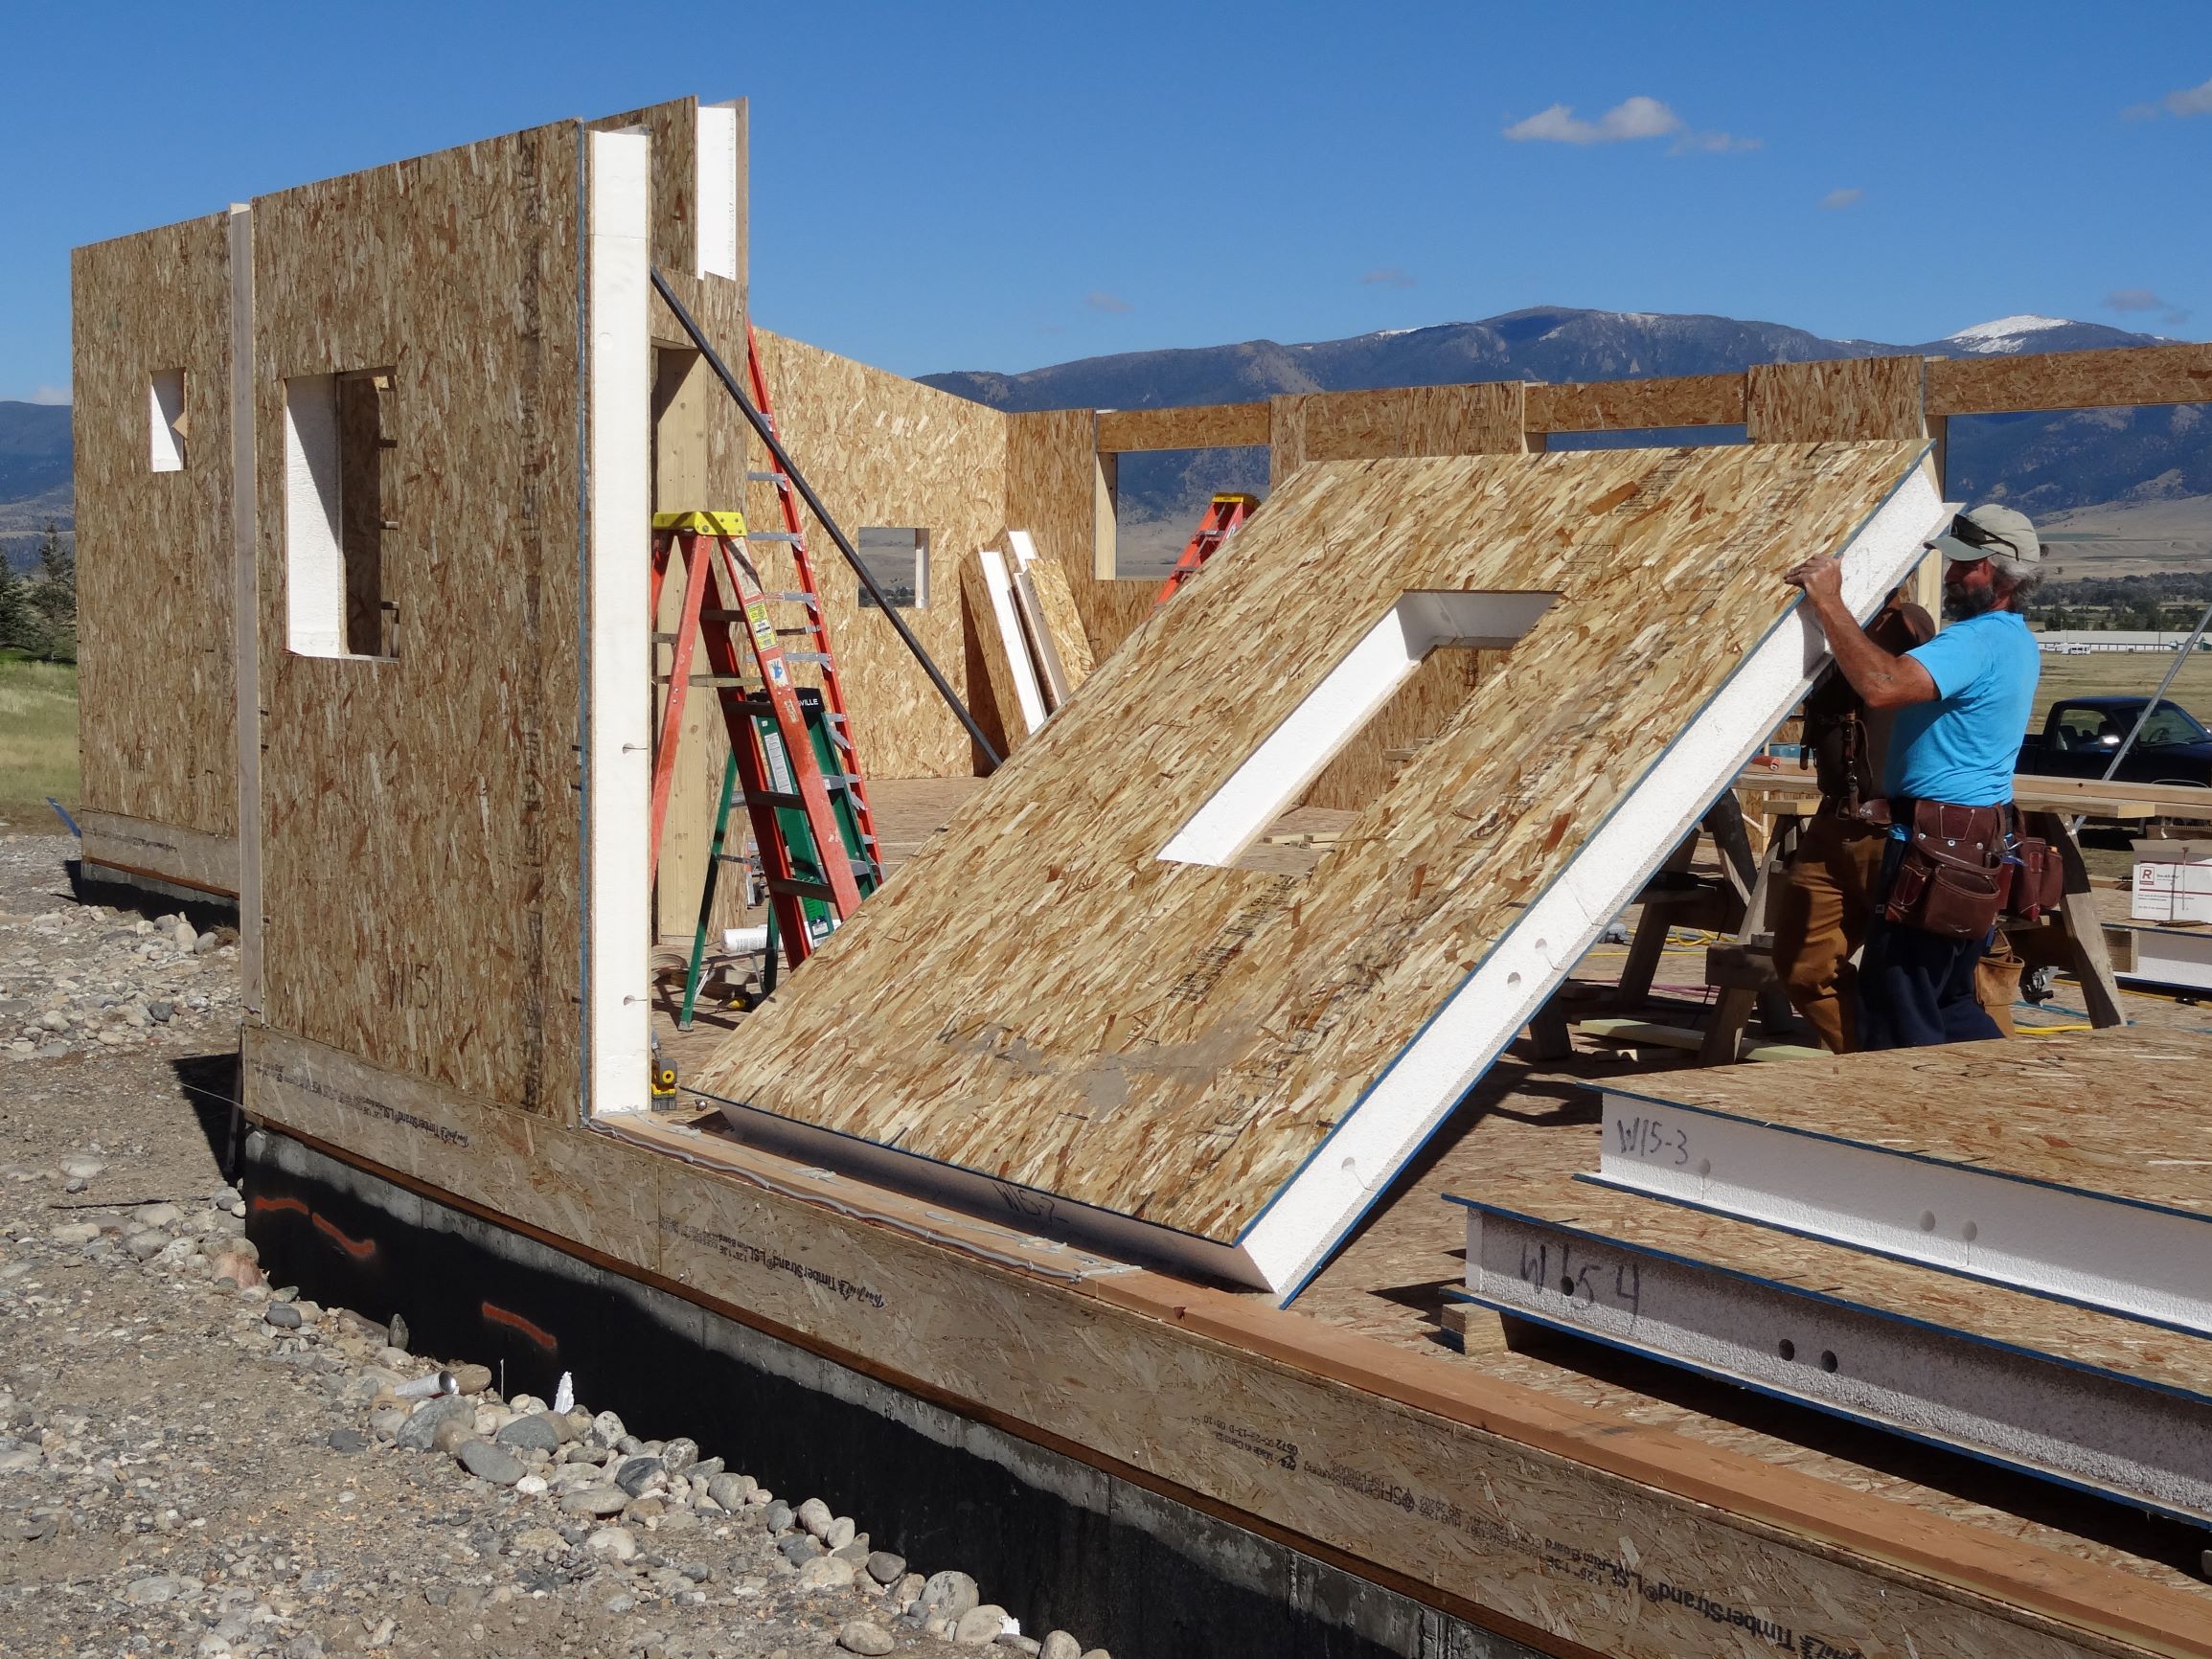 Structural insulated panels (SIPs)